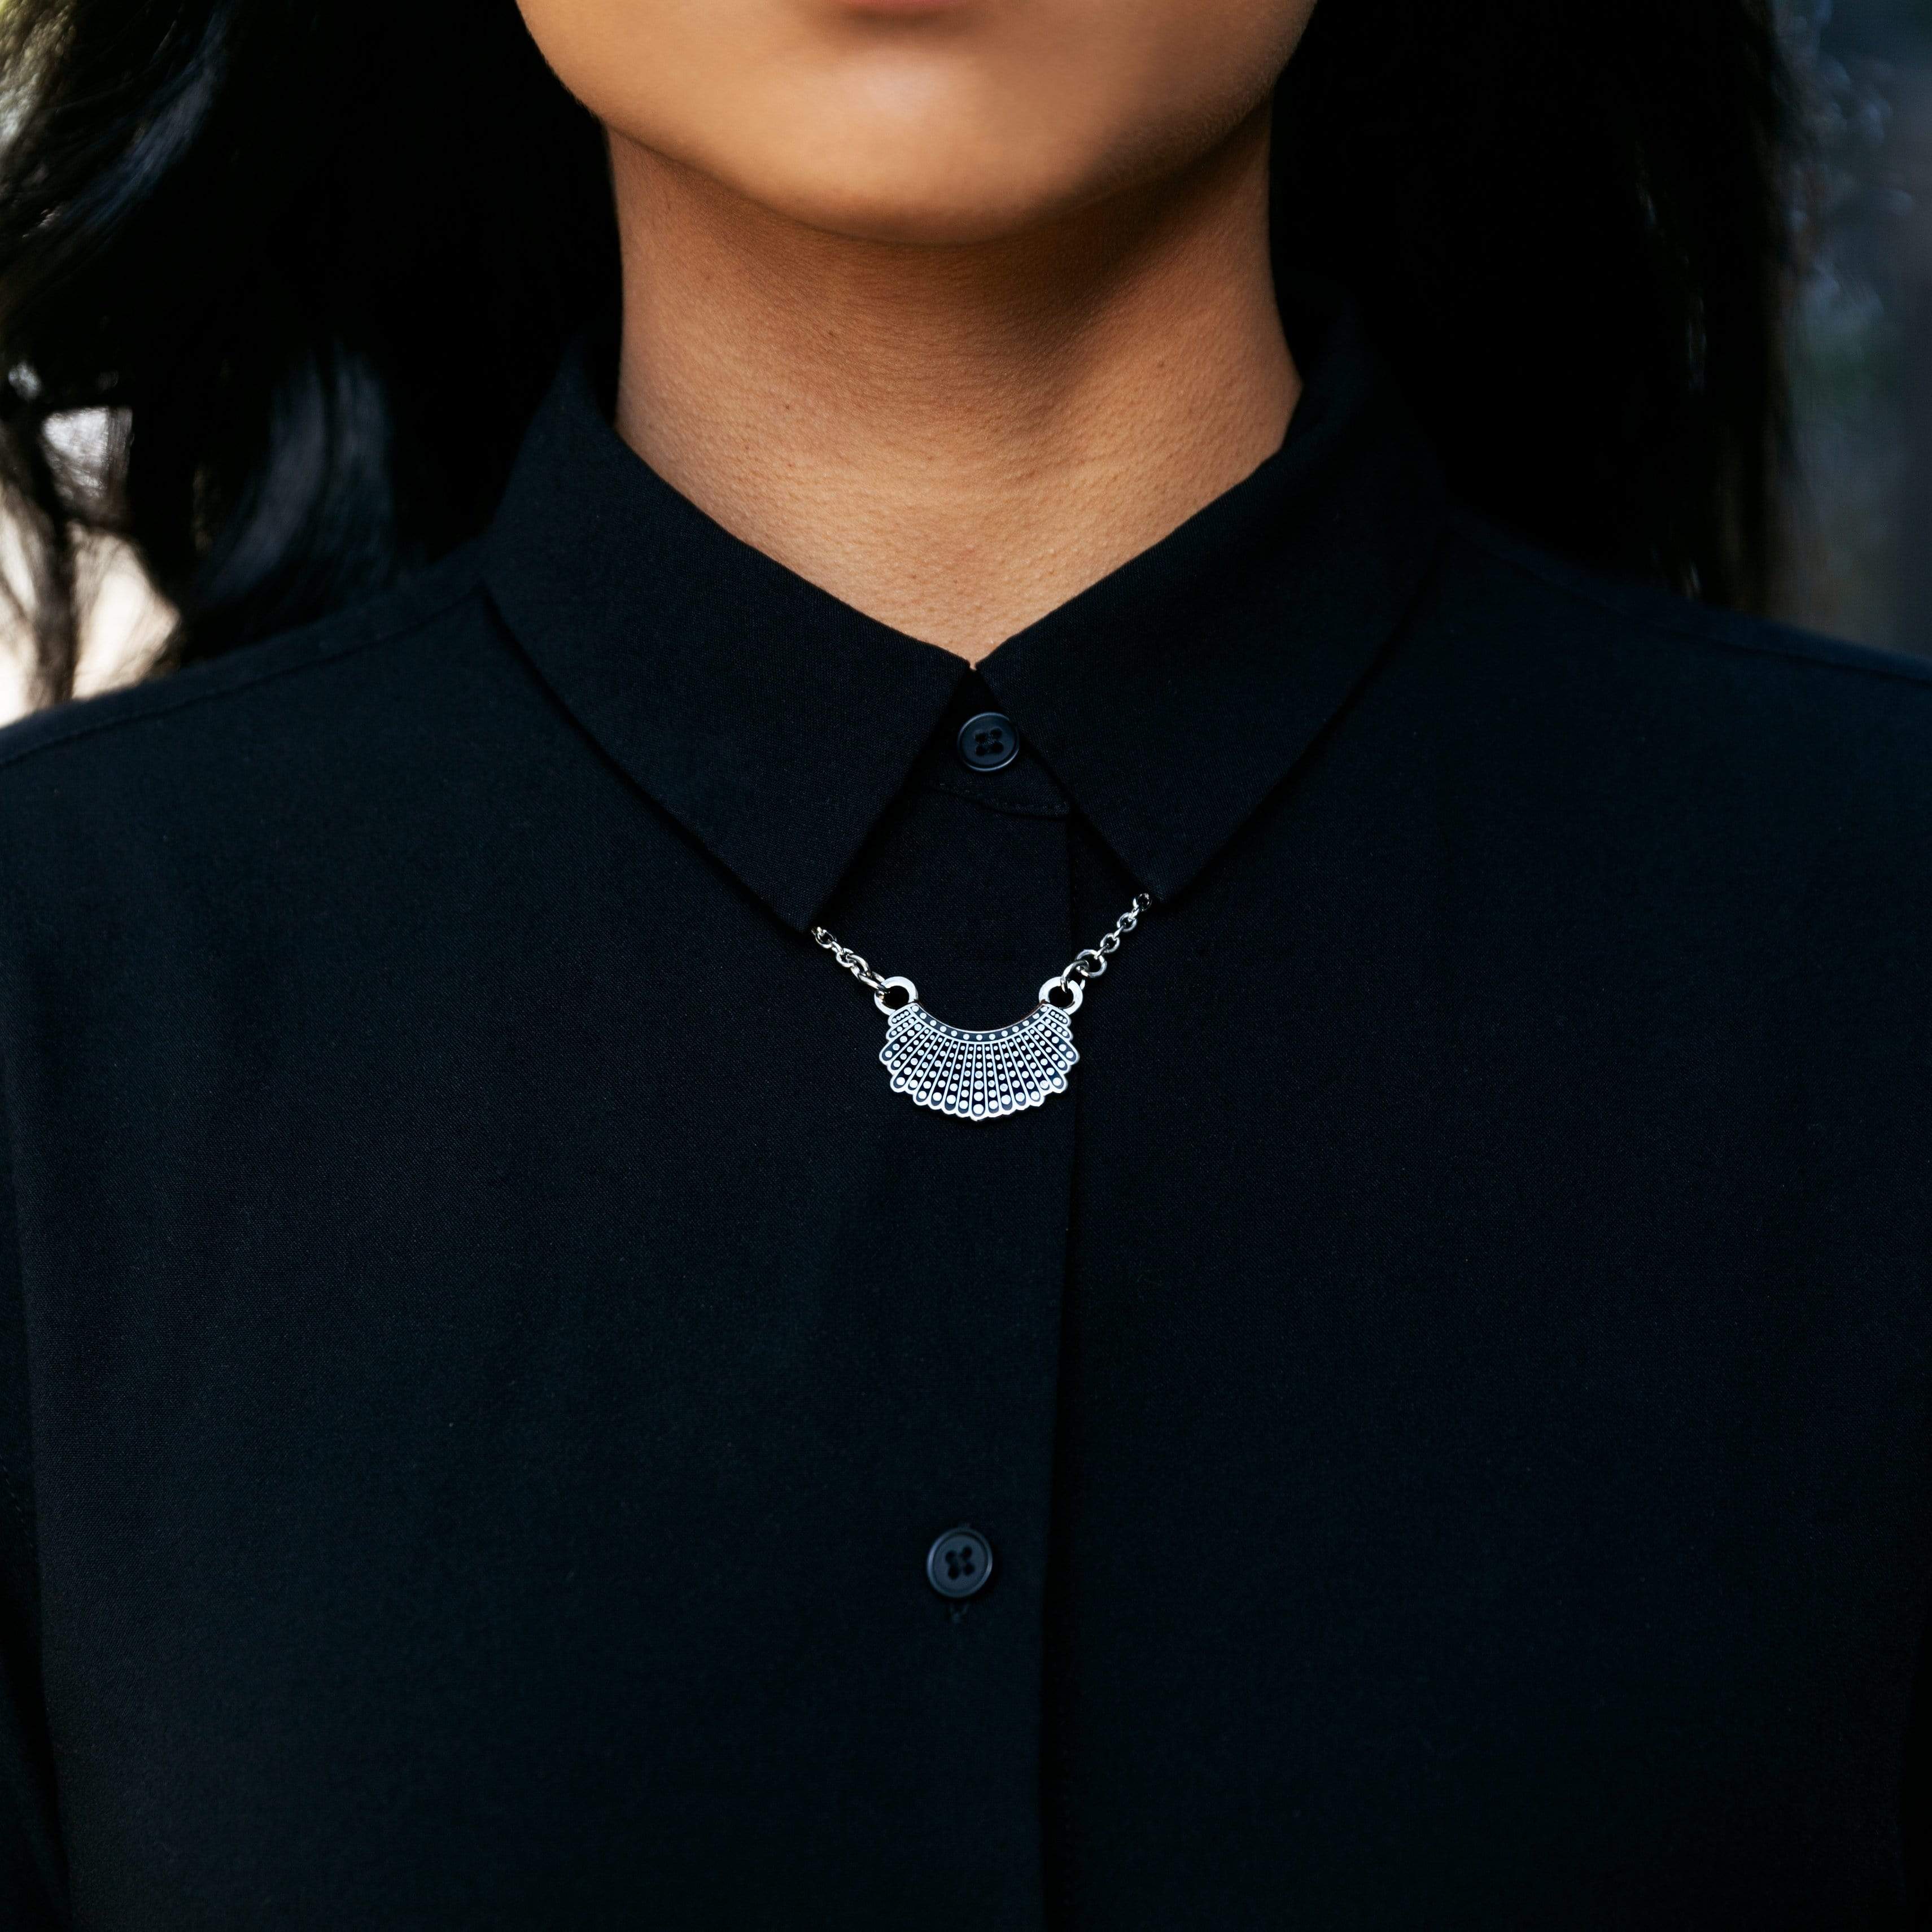 Dissent Collar Hook and Hoop + Necklace (set)